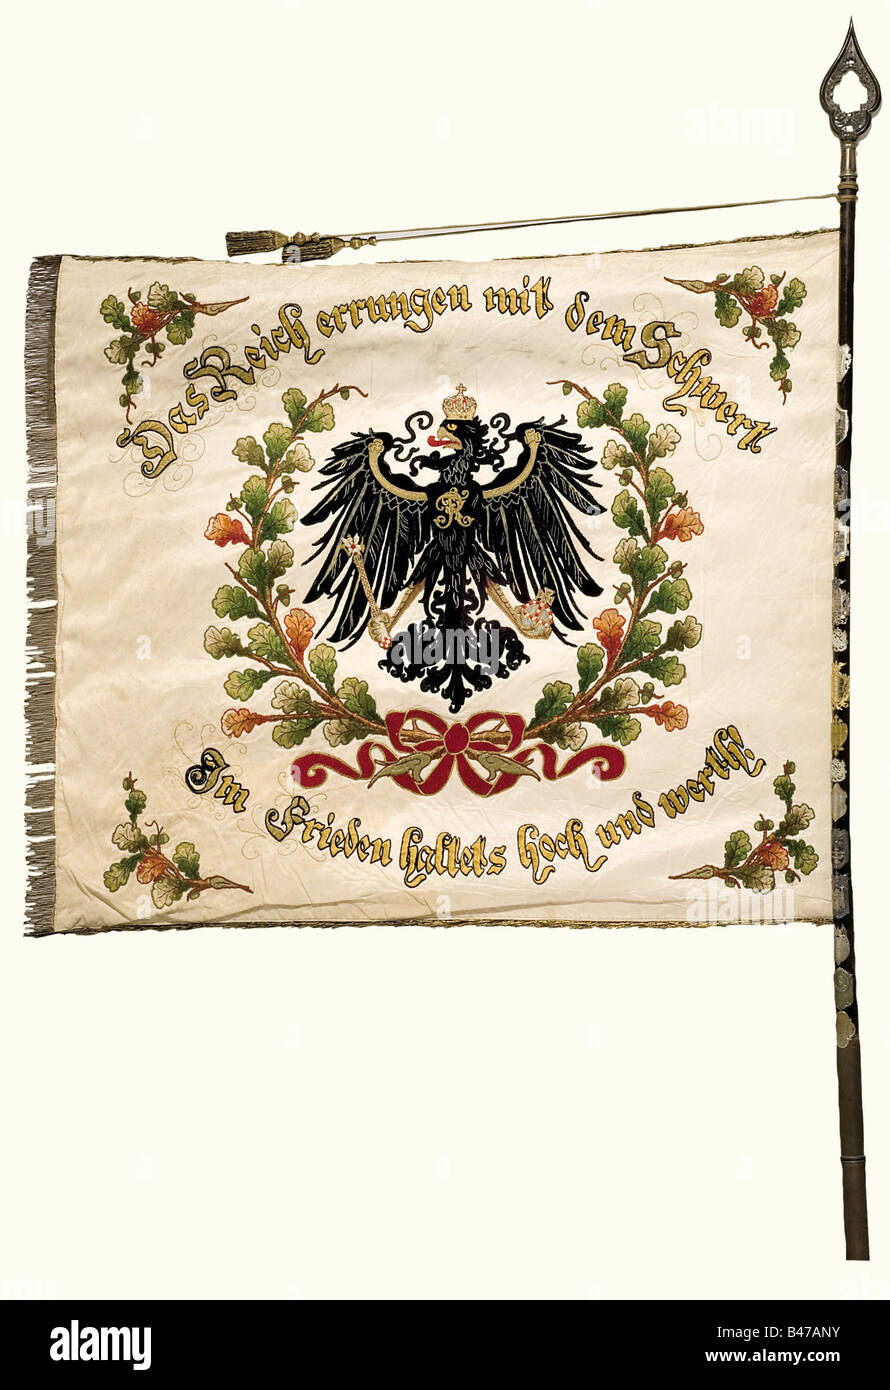 A war veterans association colour, Hiddesdorf-Ohlendorf White silk with an imperial eagle embroidered in gold and in colour in an oak leaf wreath. Surrounding inscription, 'Das Reich errungen mit dem Schwert - Im Frieden haltets hoch und wert' (The empire was won with the sword - In peace hold it high and in respect). The name inscription is embroidered on the reverse side in the imperial colours, black-white-red 'Krieger-Verein - Hiddesdorf-Ohlendorf - 1896.' (War Veterans Association - Hiddesdorf-Ohlendorf- 1896). Gold fringe on three sides. 135 x 120 cm. Nai, Stock Photo